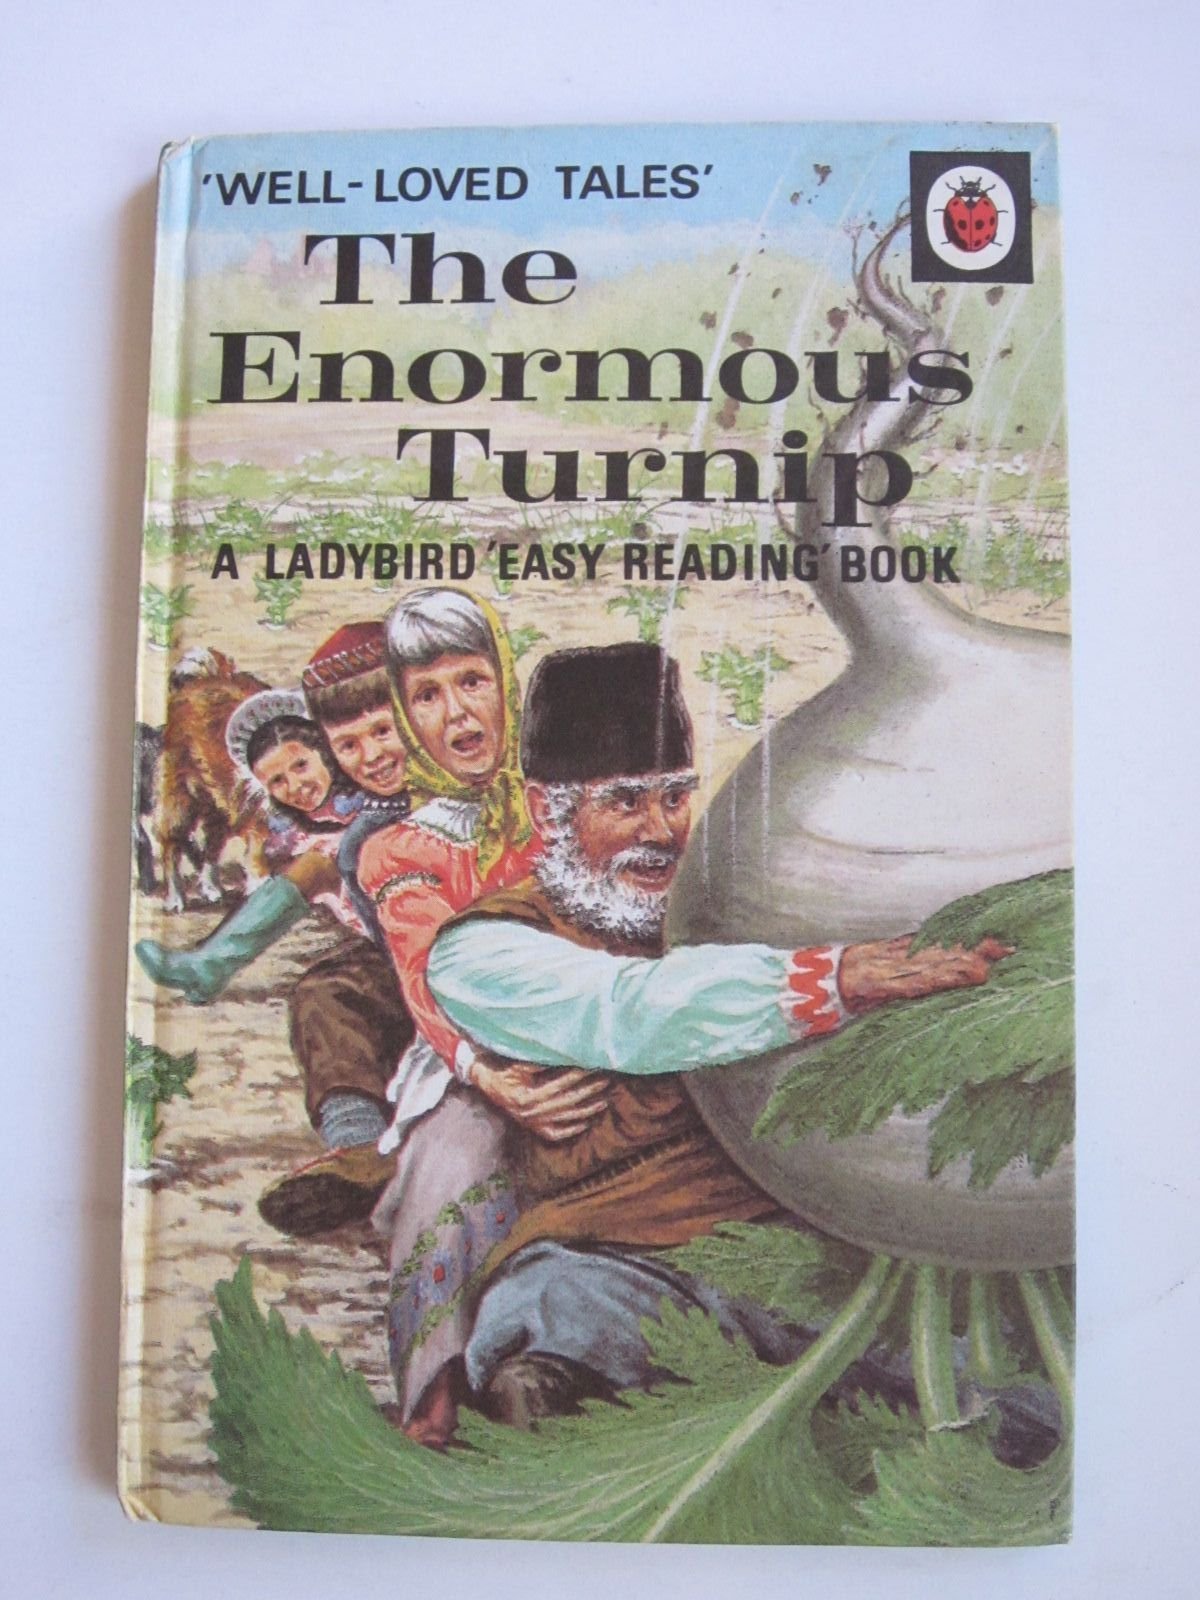 The Enormous Turnip (A Ladybird easy-reading book. Well-loved tales ...